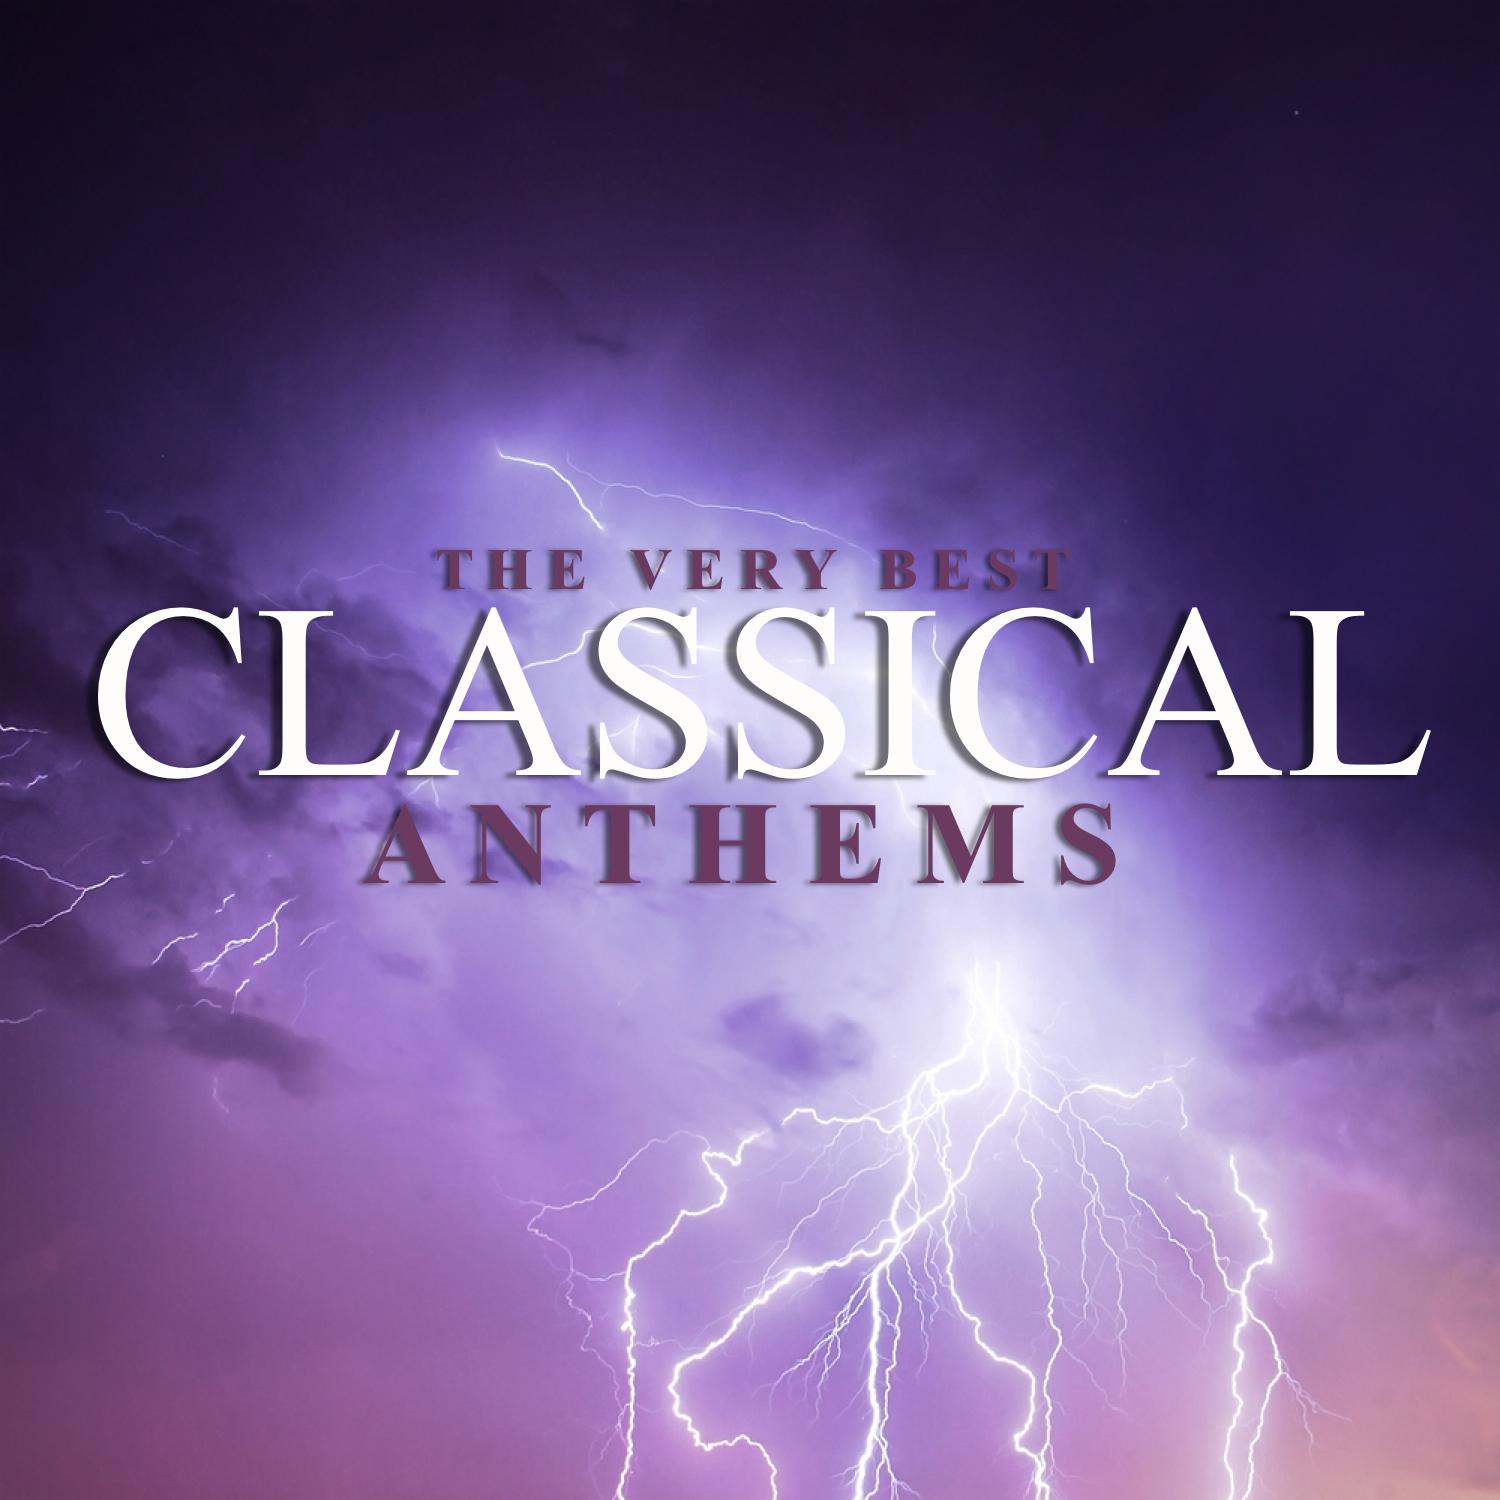 The Very Best Classical Anthems